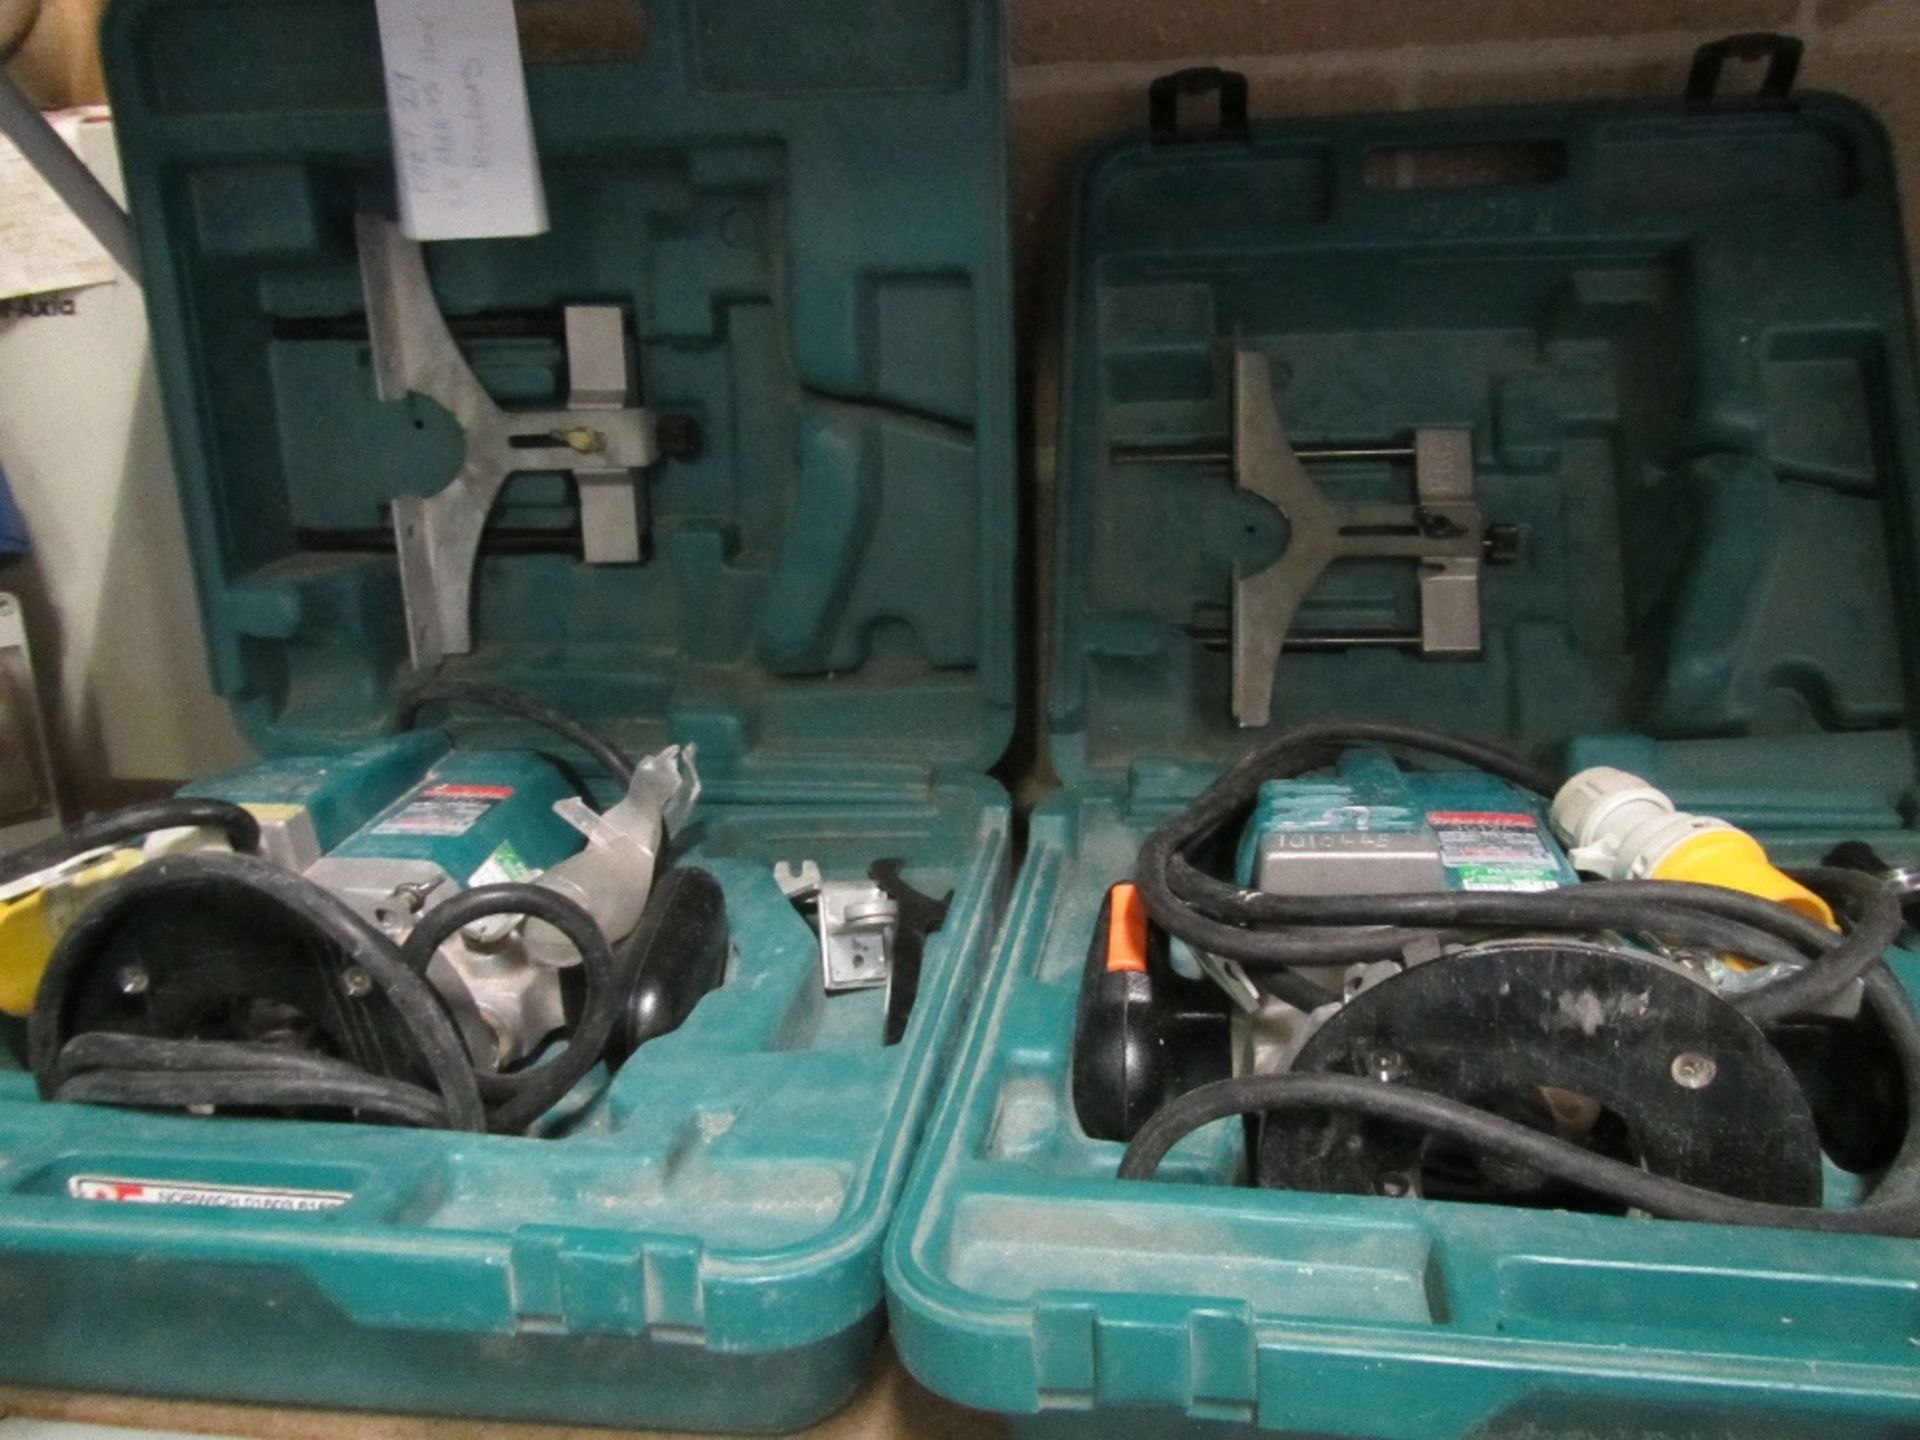 2 no. Makita 3612C 110v Router UNRESERVED LOT